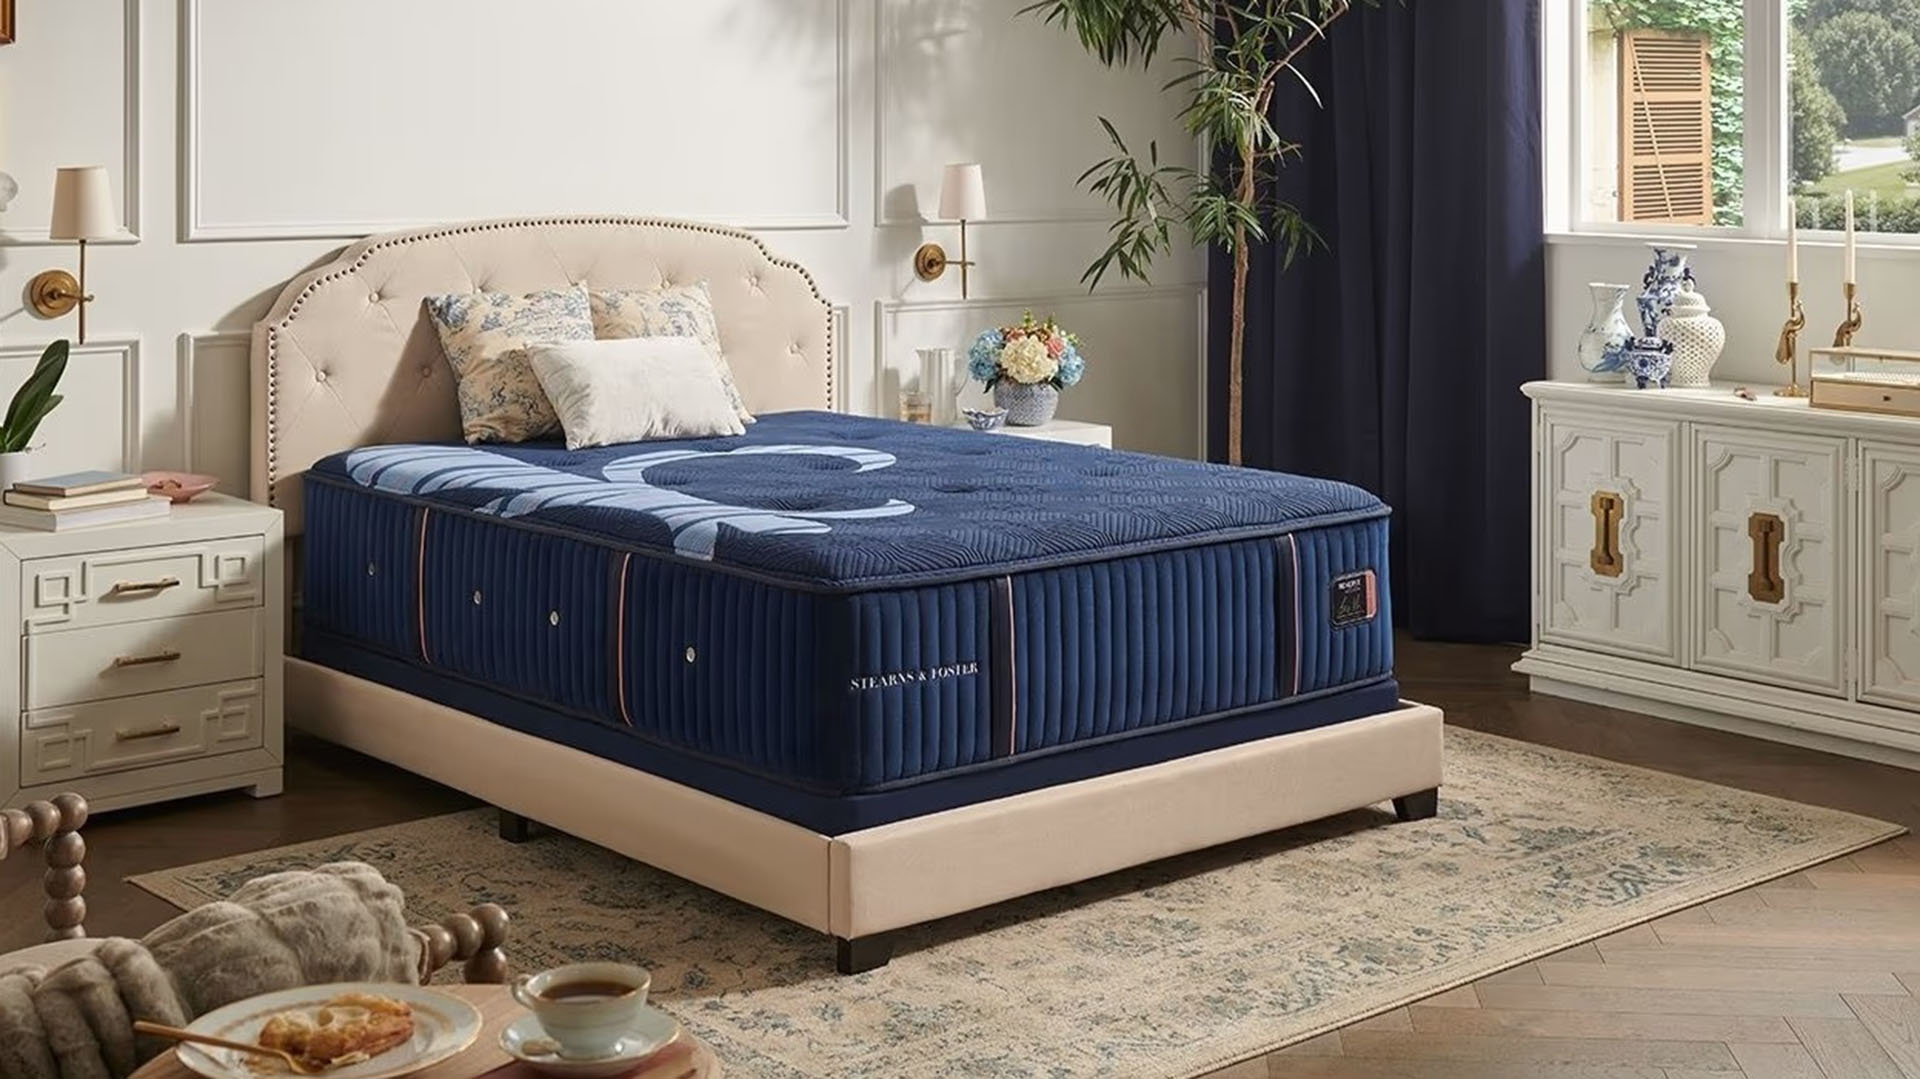 Stearns & Foster mattresses in Hamburg are designed with comfort and support in mind.